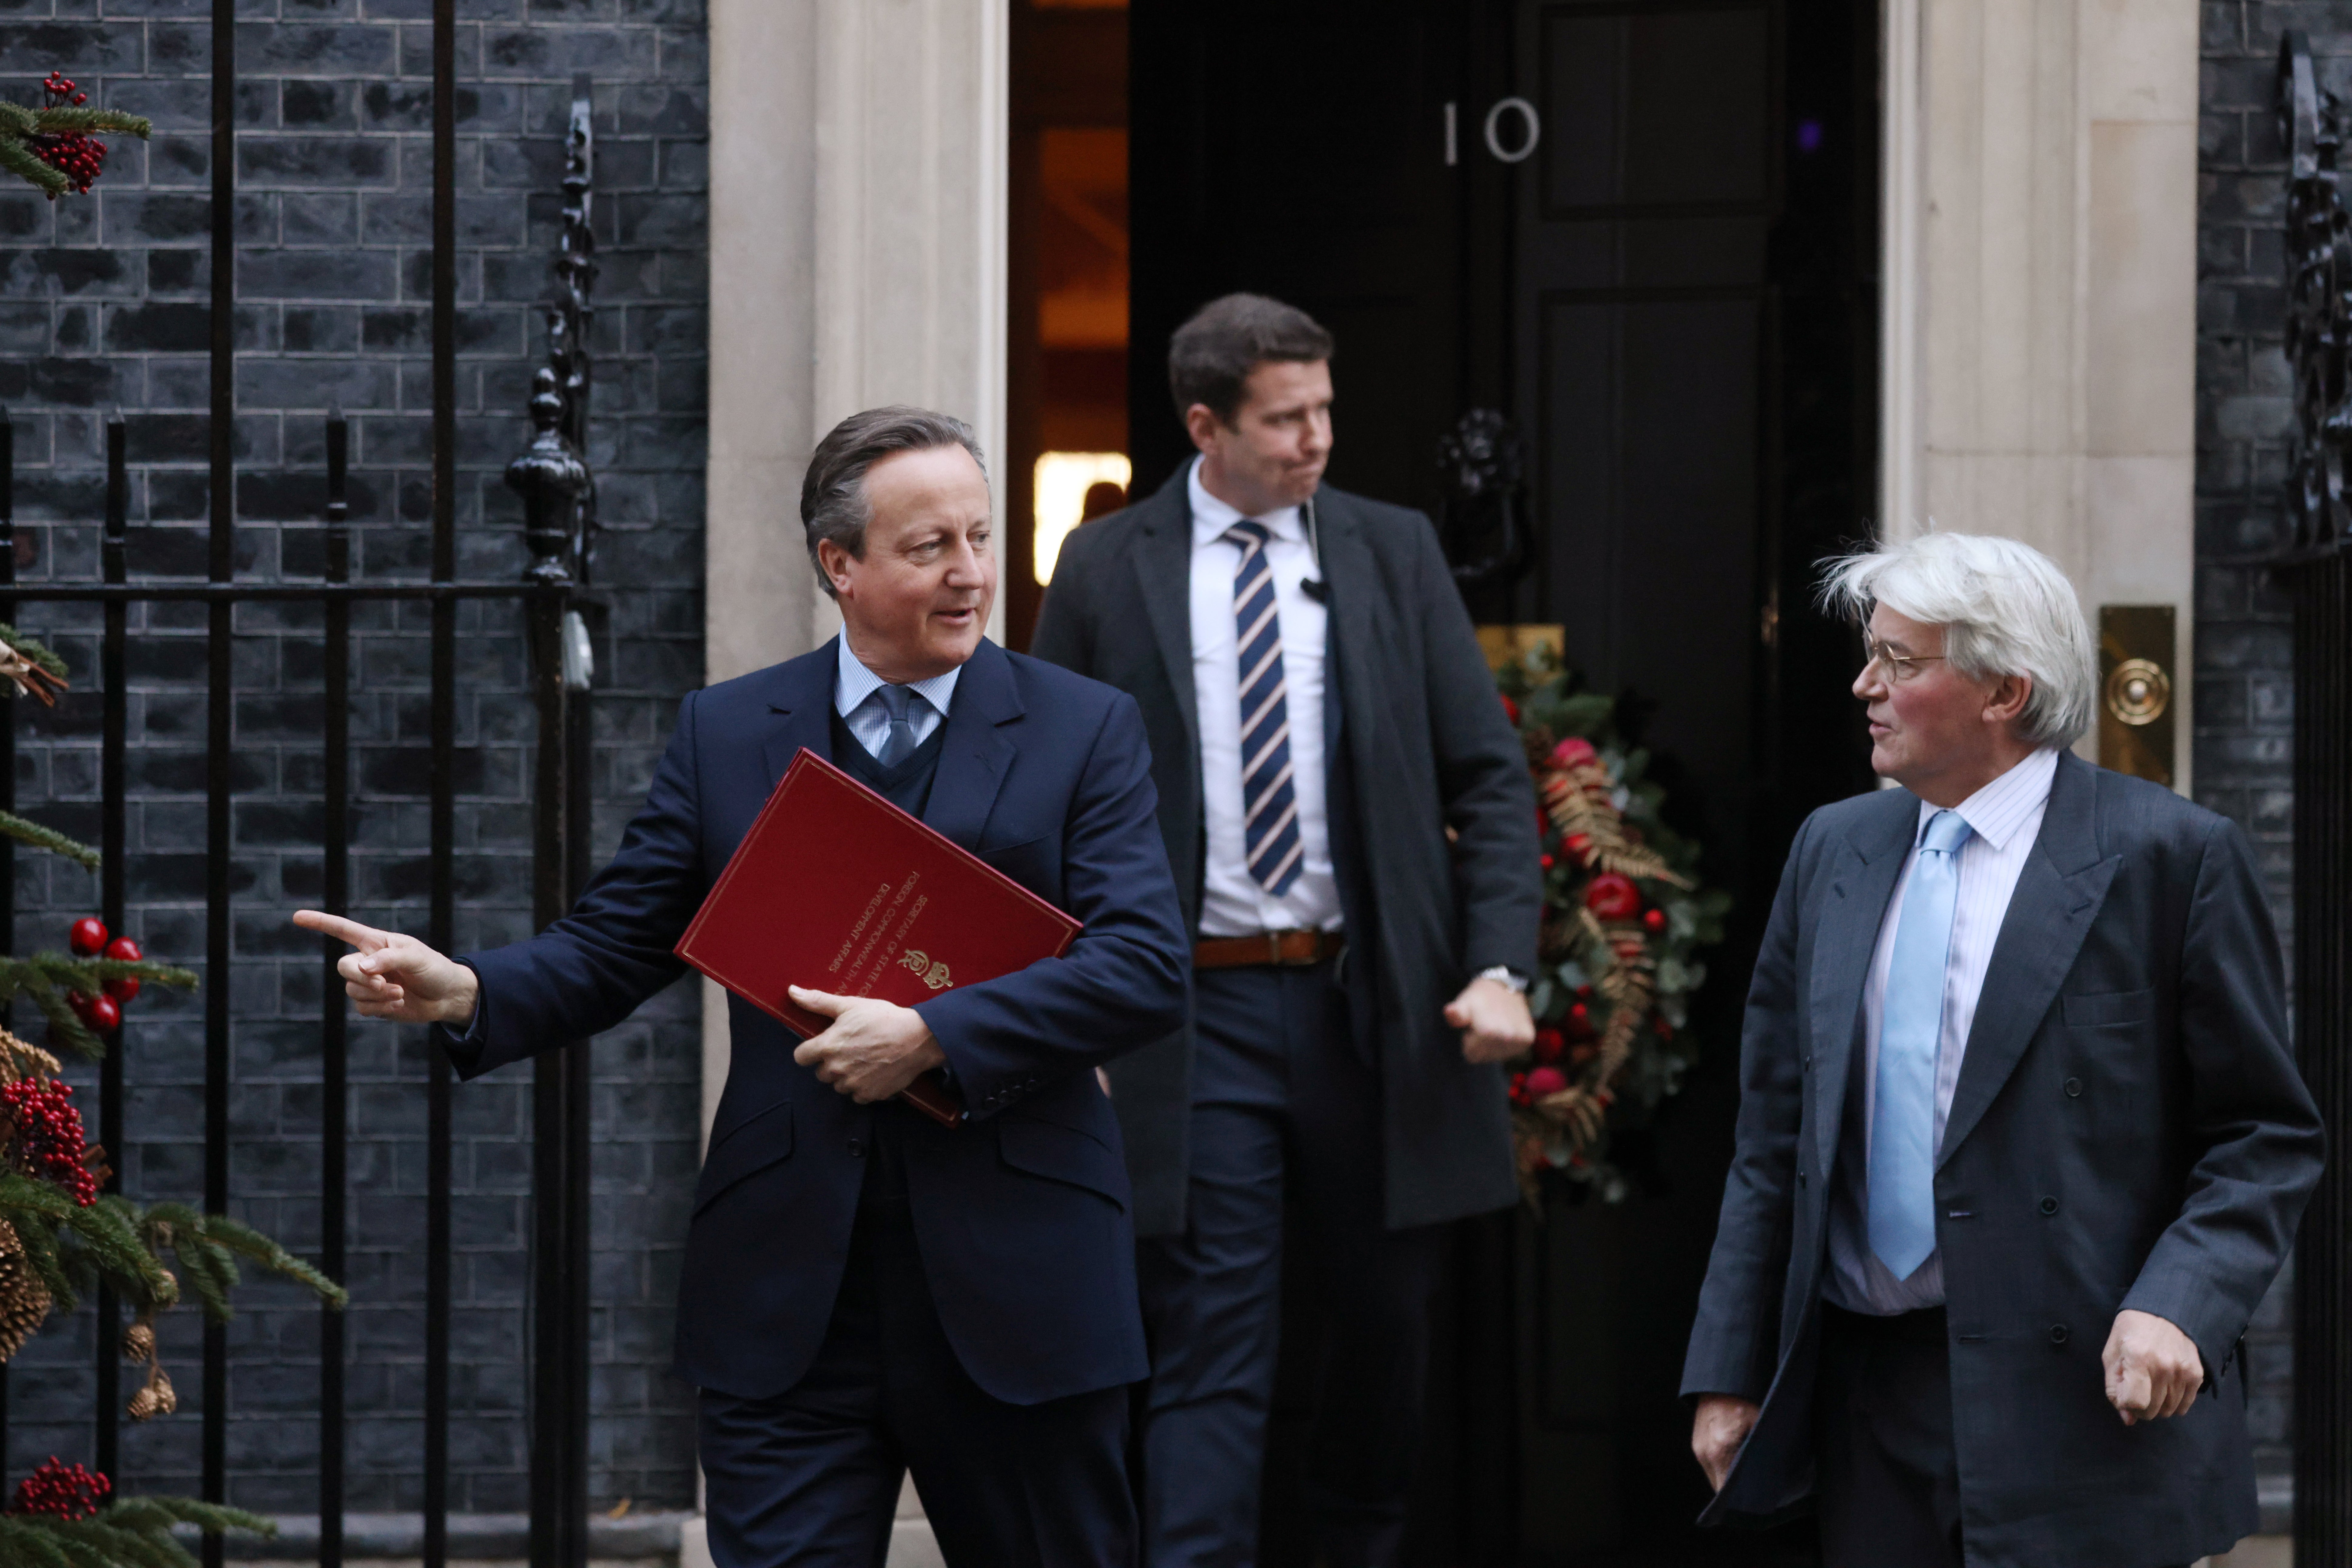 Lord Cameron leaves cabinet on Tuesday ahead of trip to Brussels